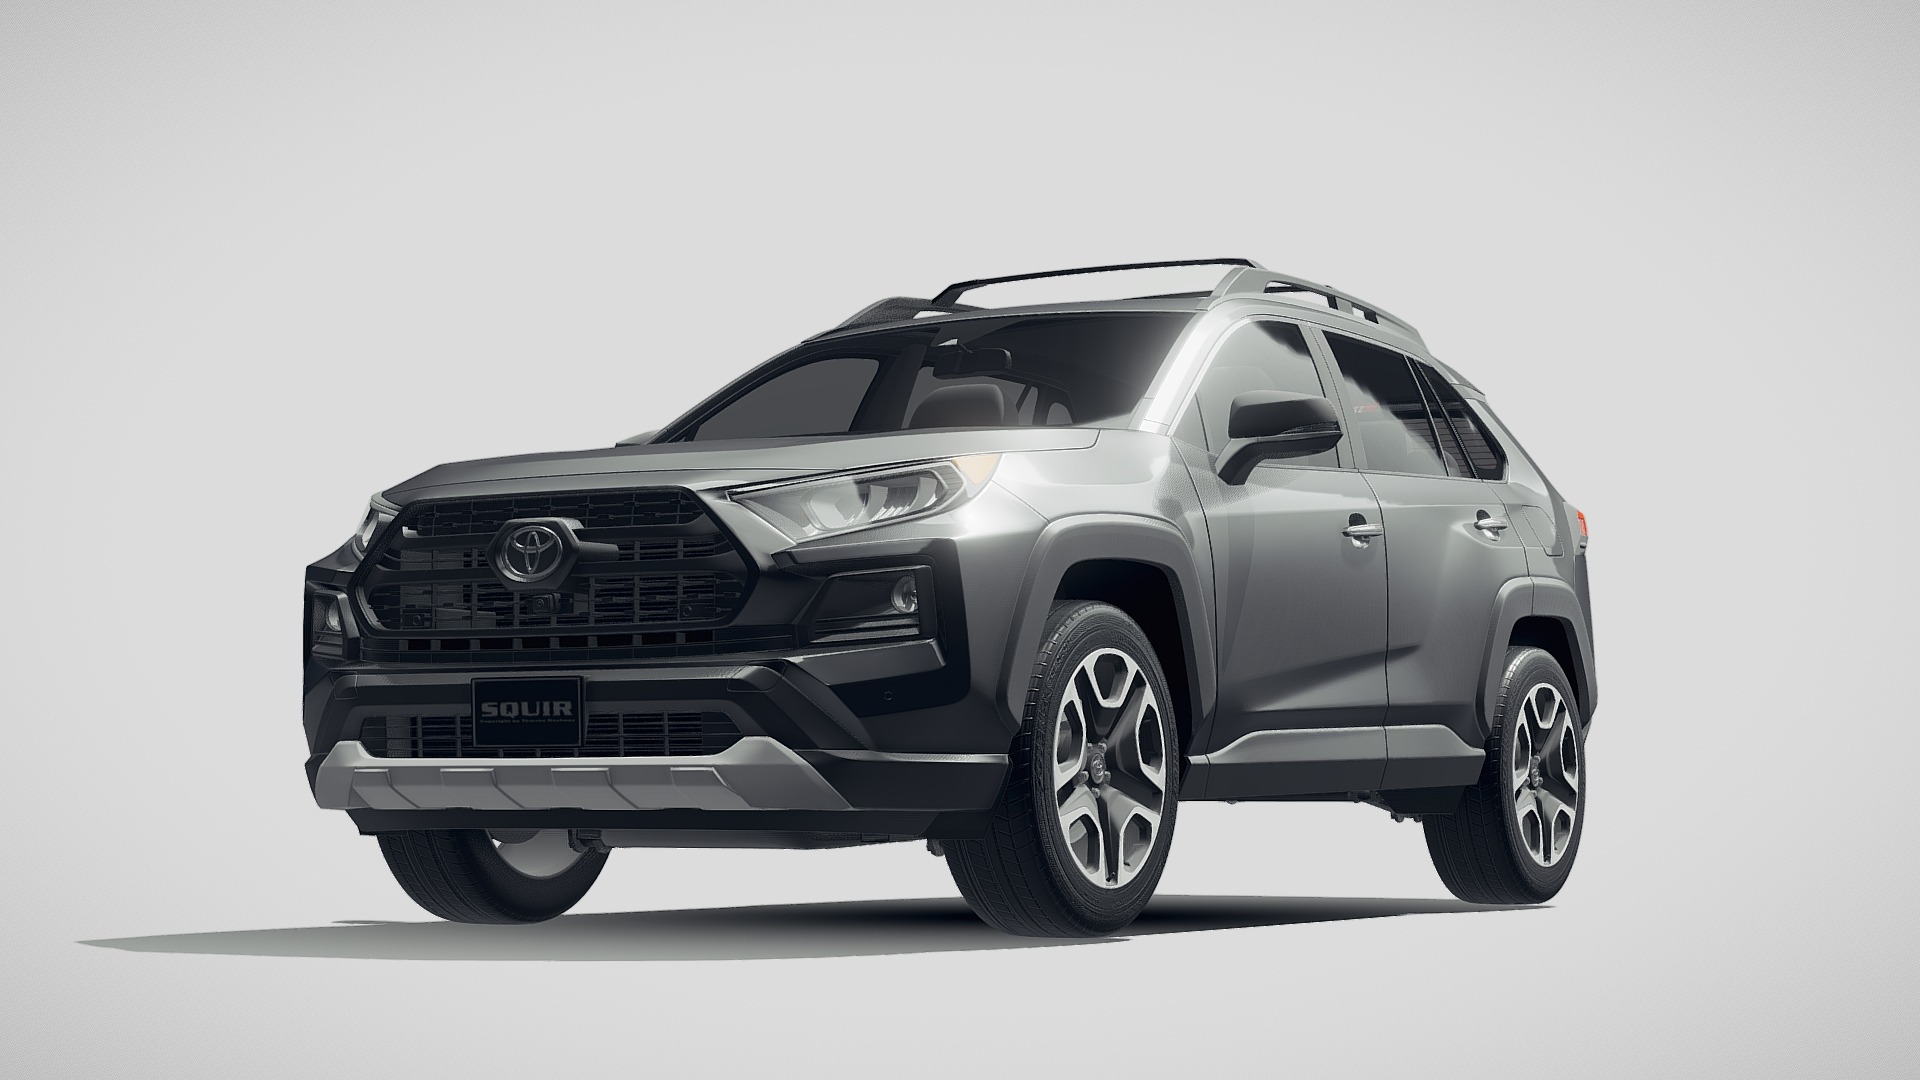 3D model Toyota RAV4 Adventure 2019 - This is a 3D model of the Toyota RAV4 Adventure 2019. The 3D model is about a black car with a white background.